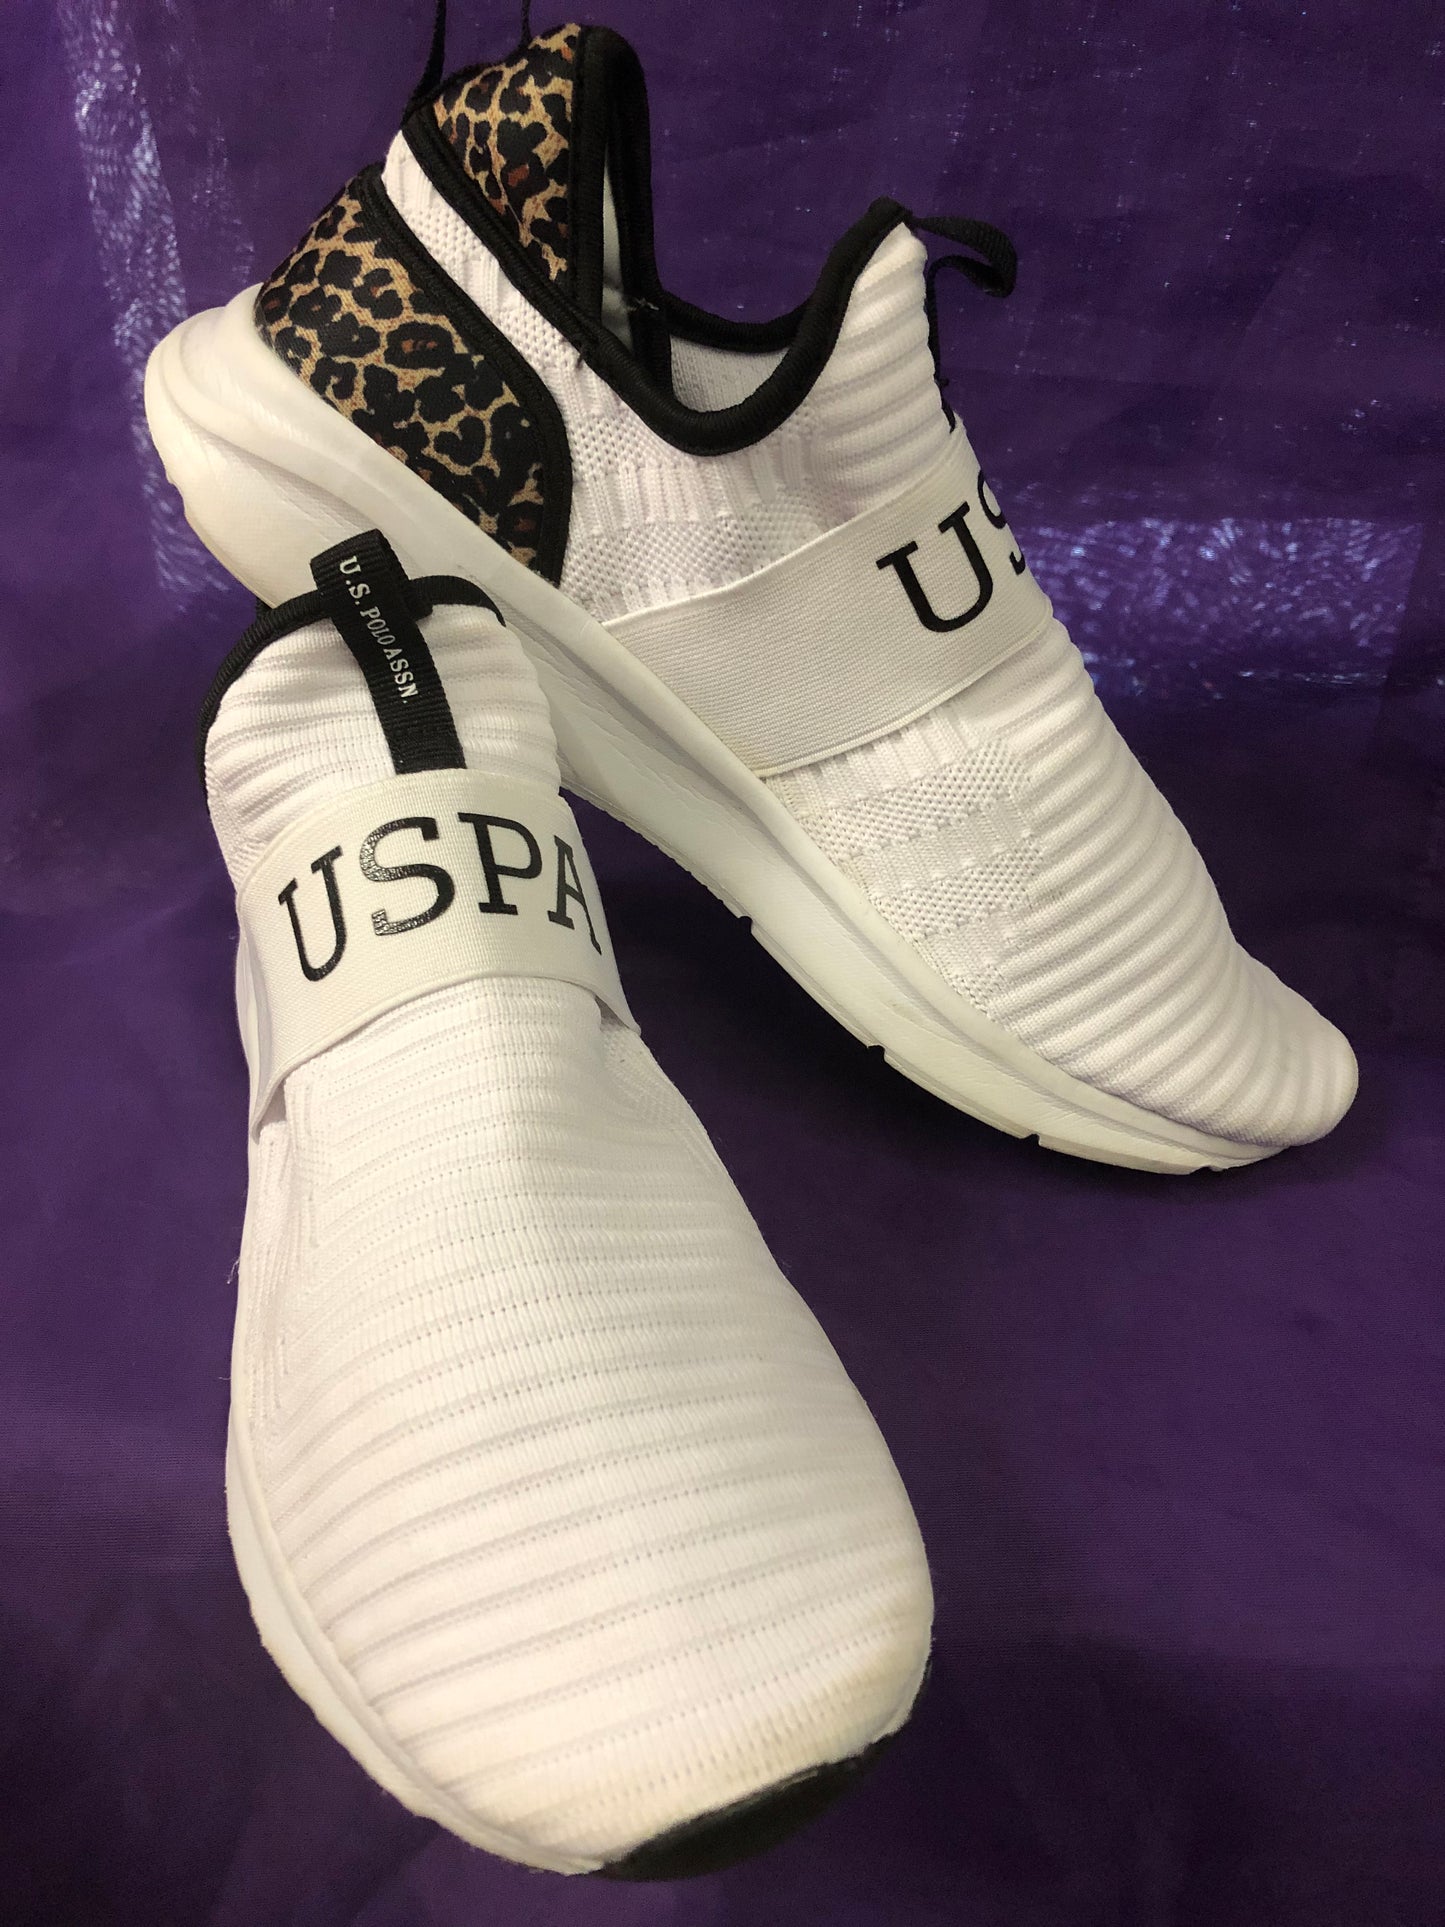 Woman  Adult Slip On U.S. Polo Assn. Sneaker Size 11 Color White Cheetah Print Black."SOLD OUT THANKS FOR YOUR PURCHASE!